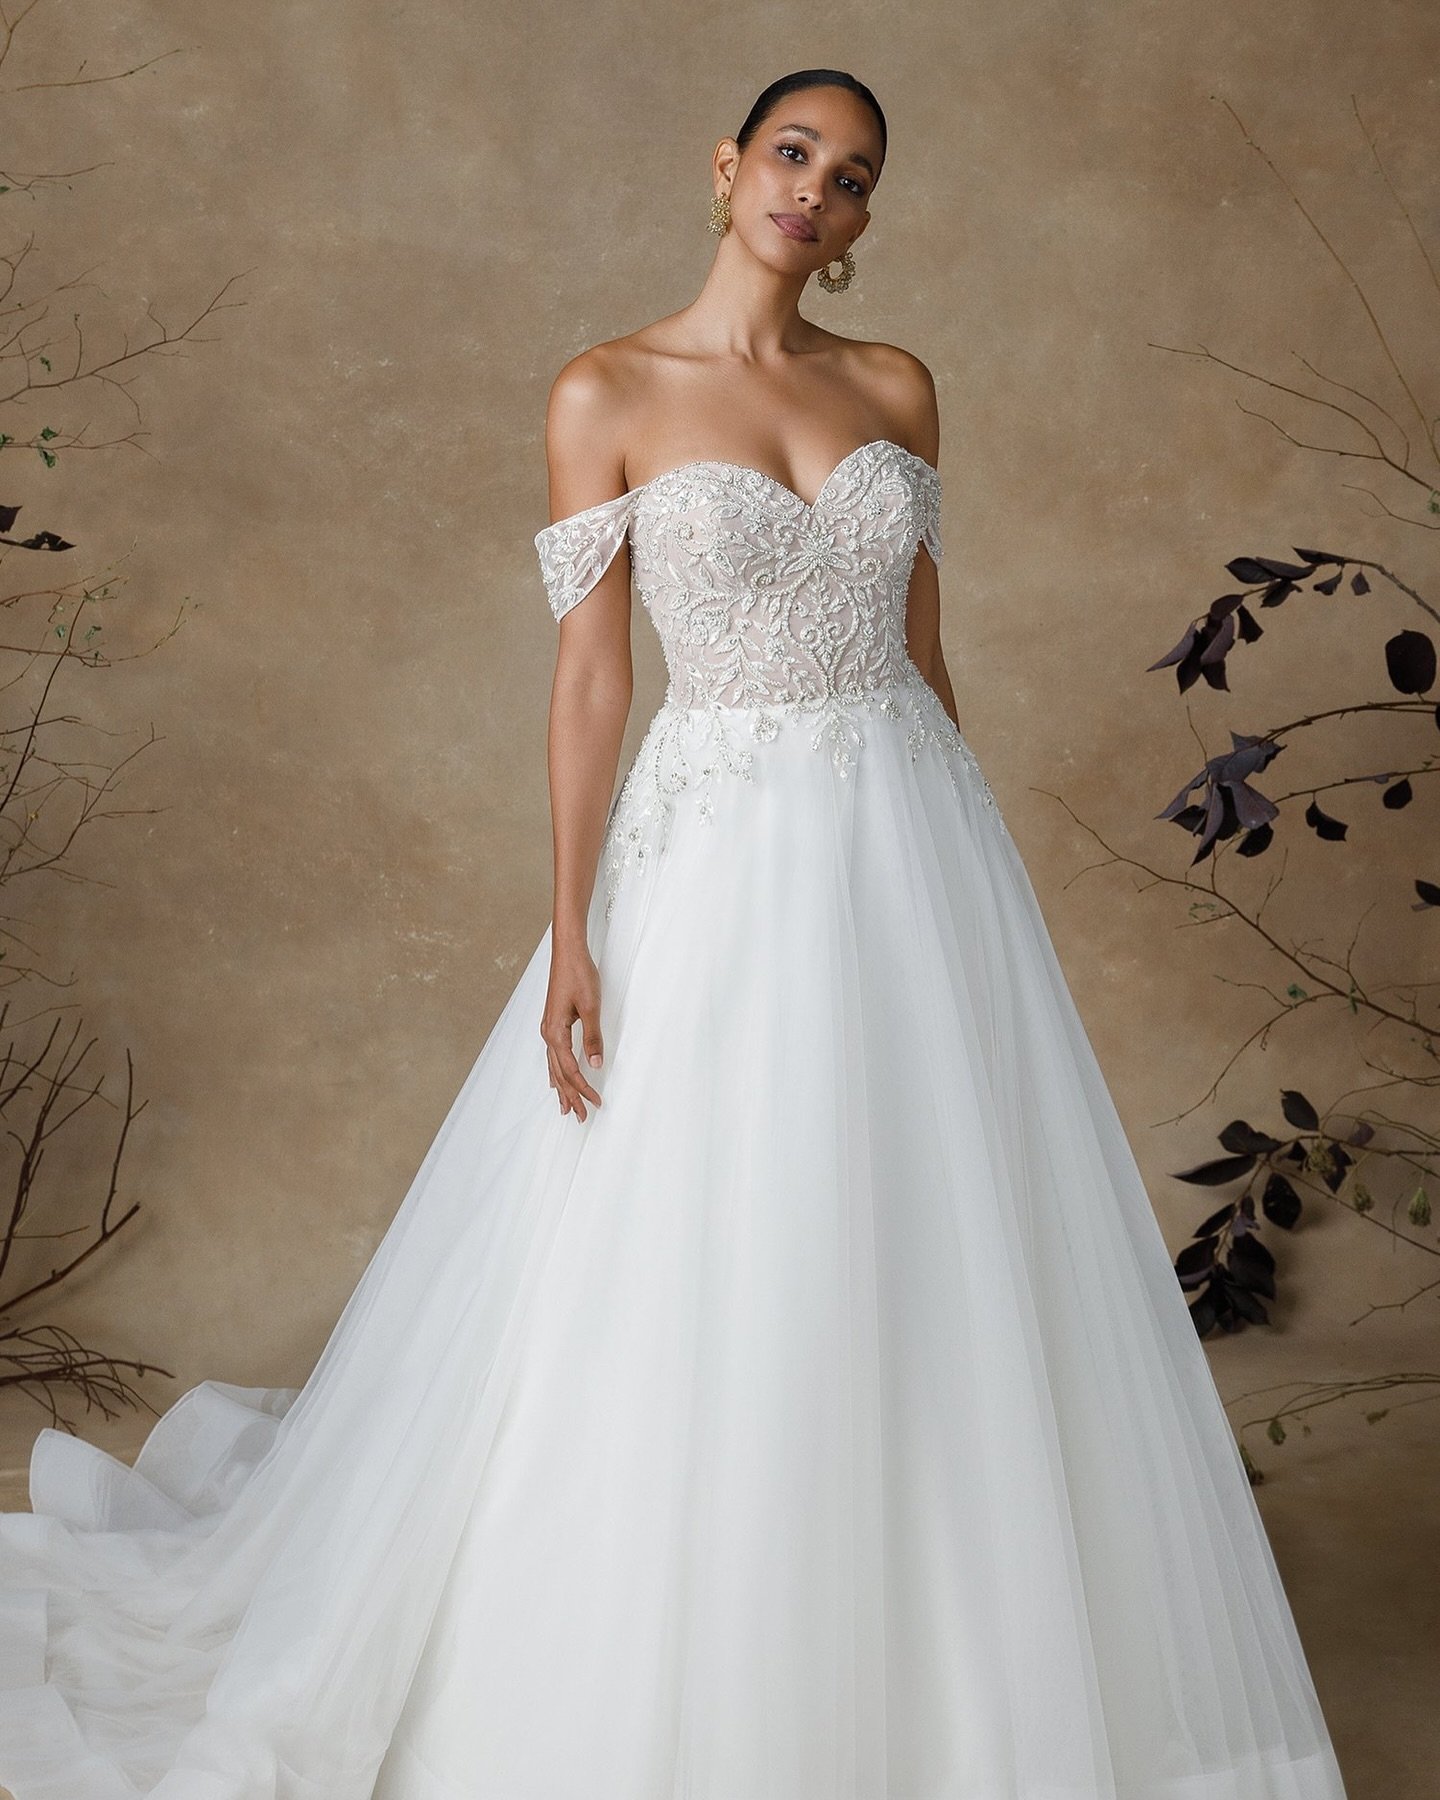 Gladys is a beautiful aline with beaded bodice - not only is she an orderable style but she&rsquo;s just been added to the outlet collection in a 14/16 with a saving of over &pound;1,300!!!!! Be quick - she won&rsquo;t be around for long!!